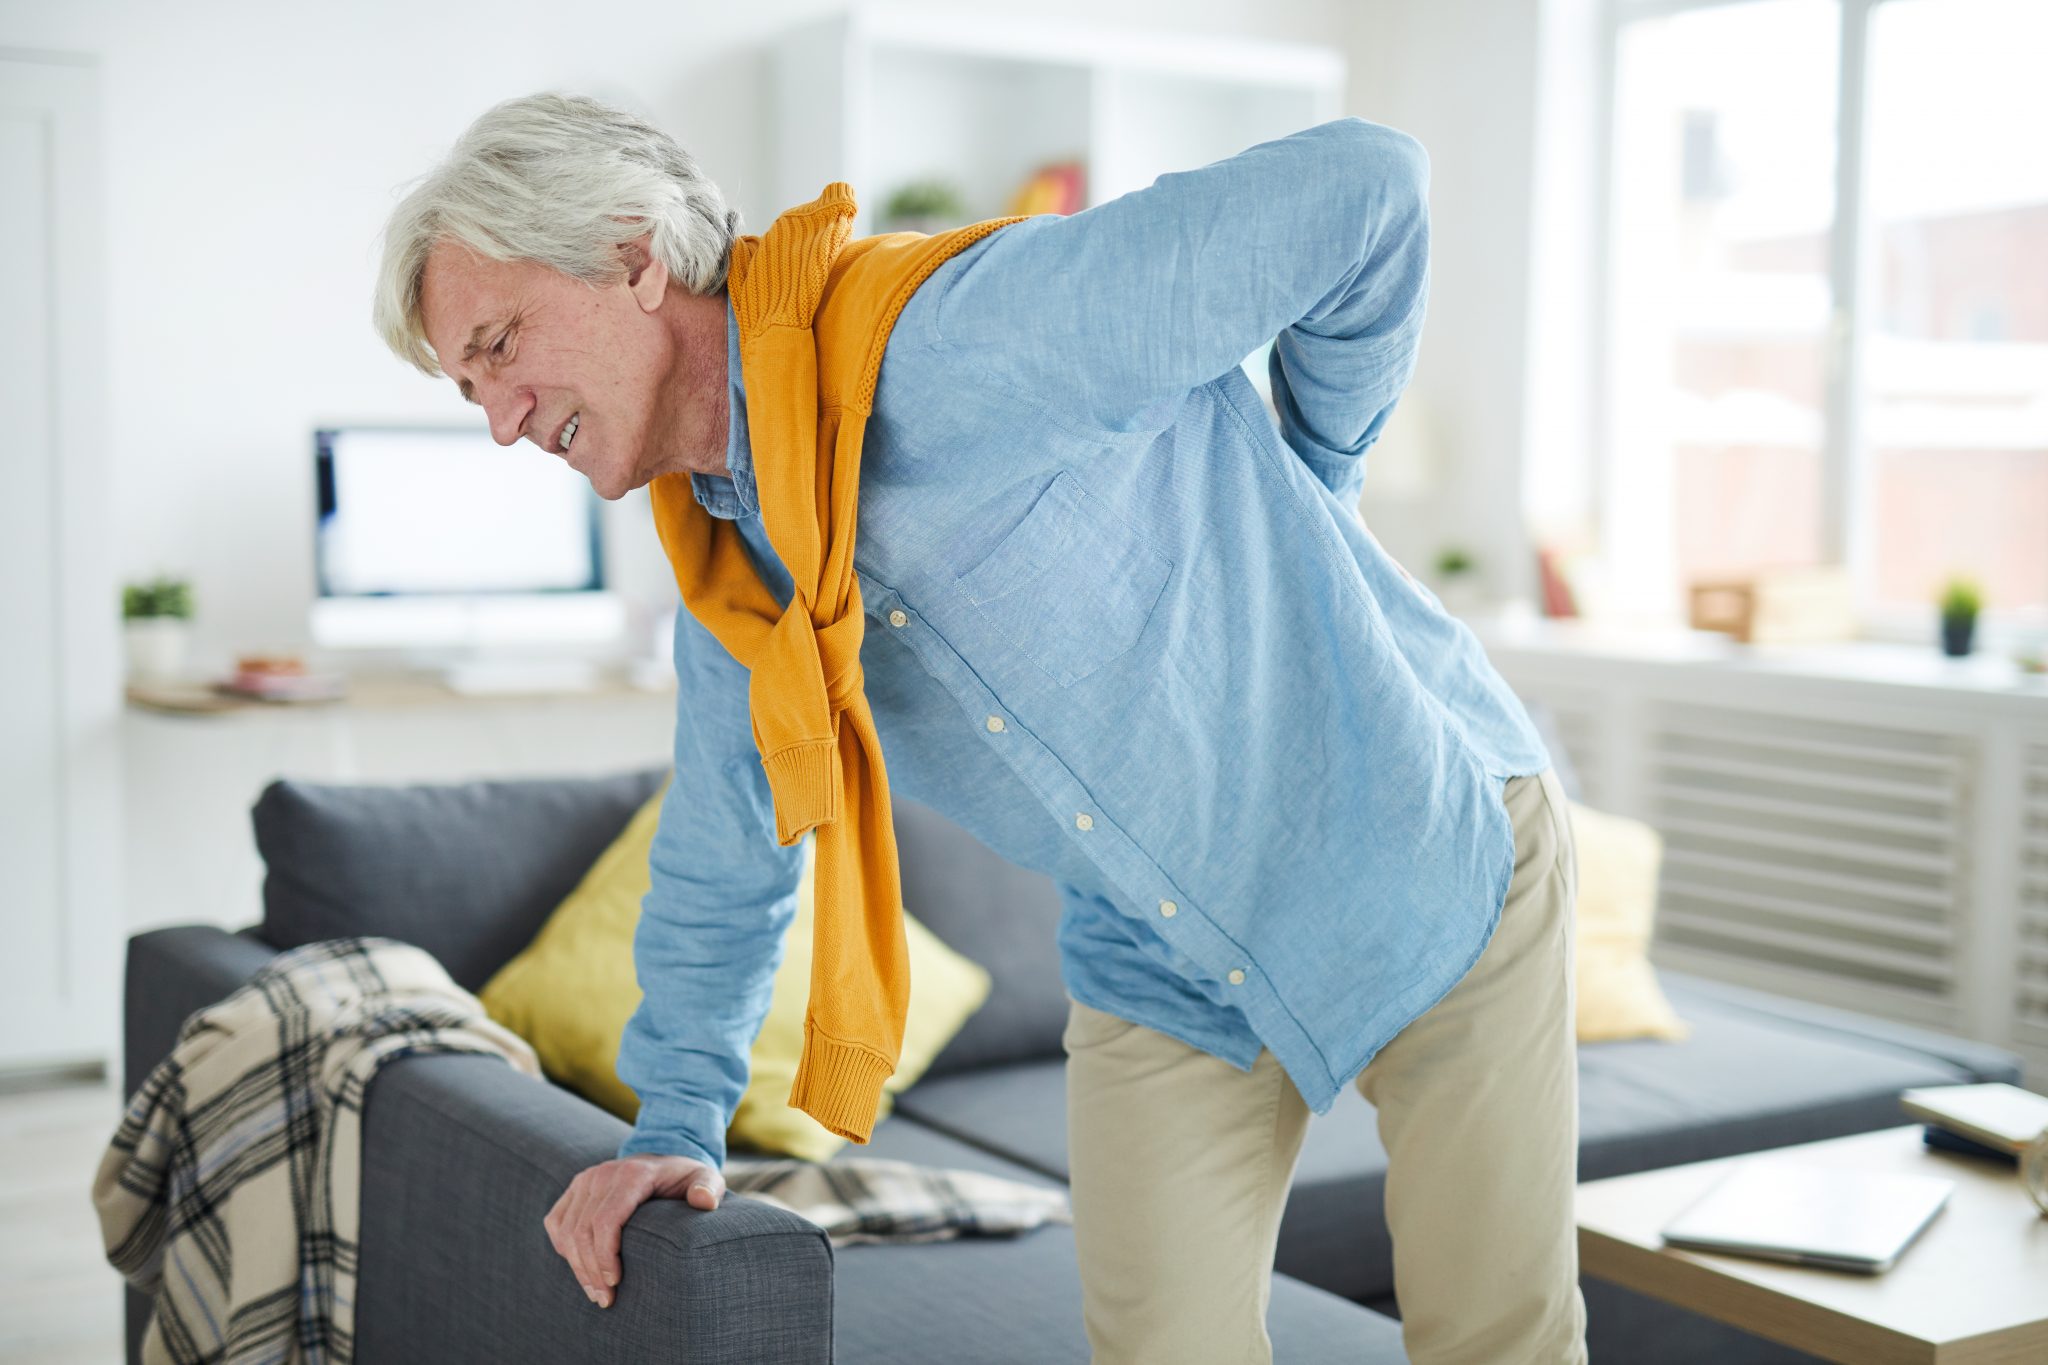 Back Pain And Heart Attack: What's The Link?